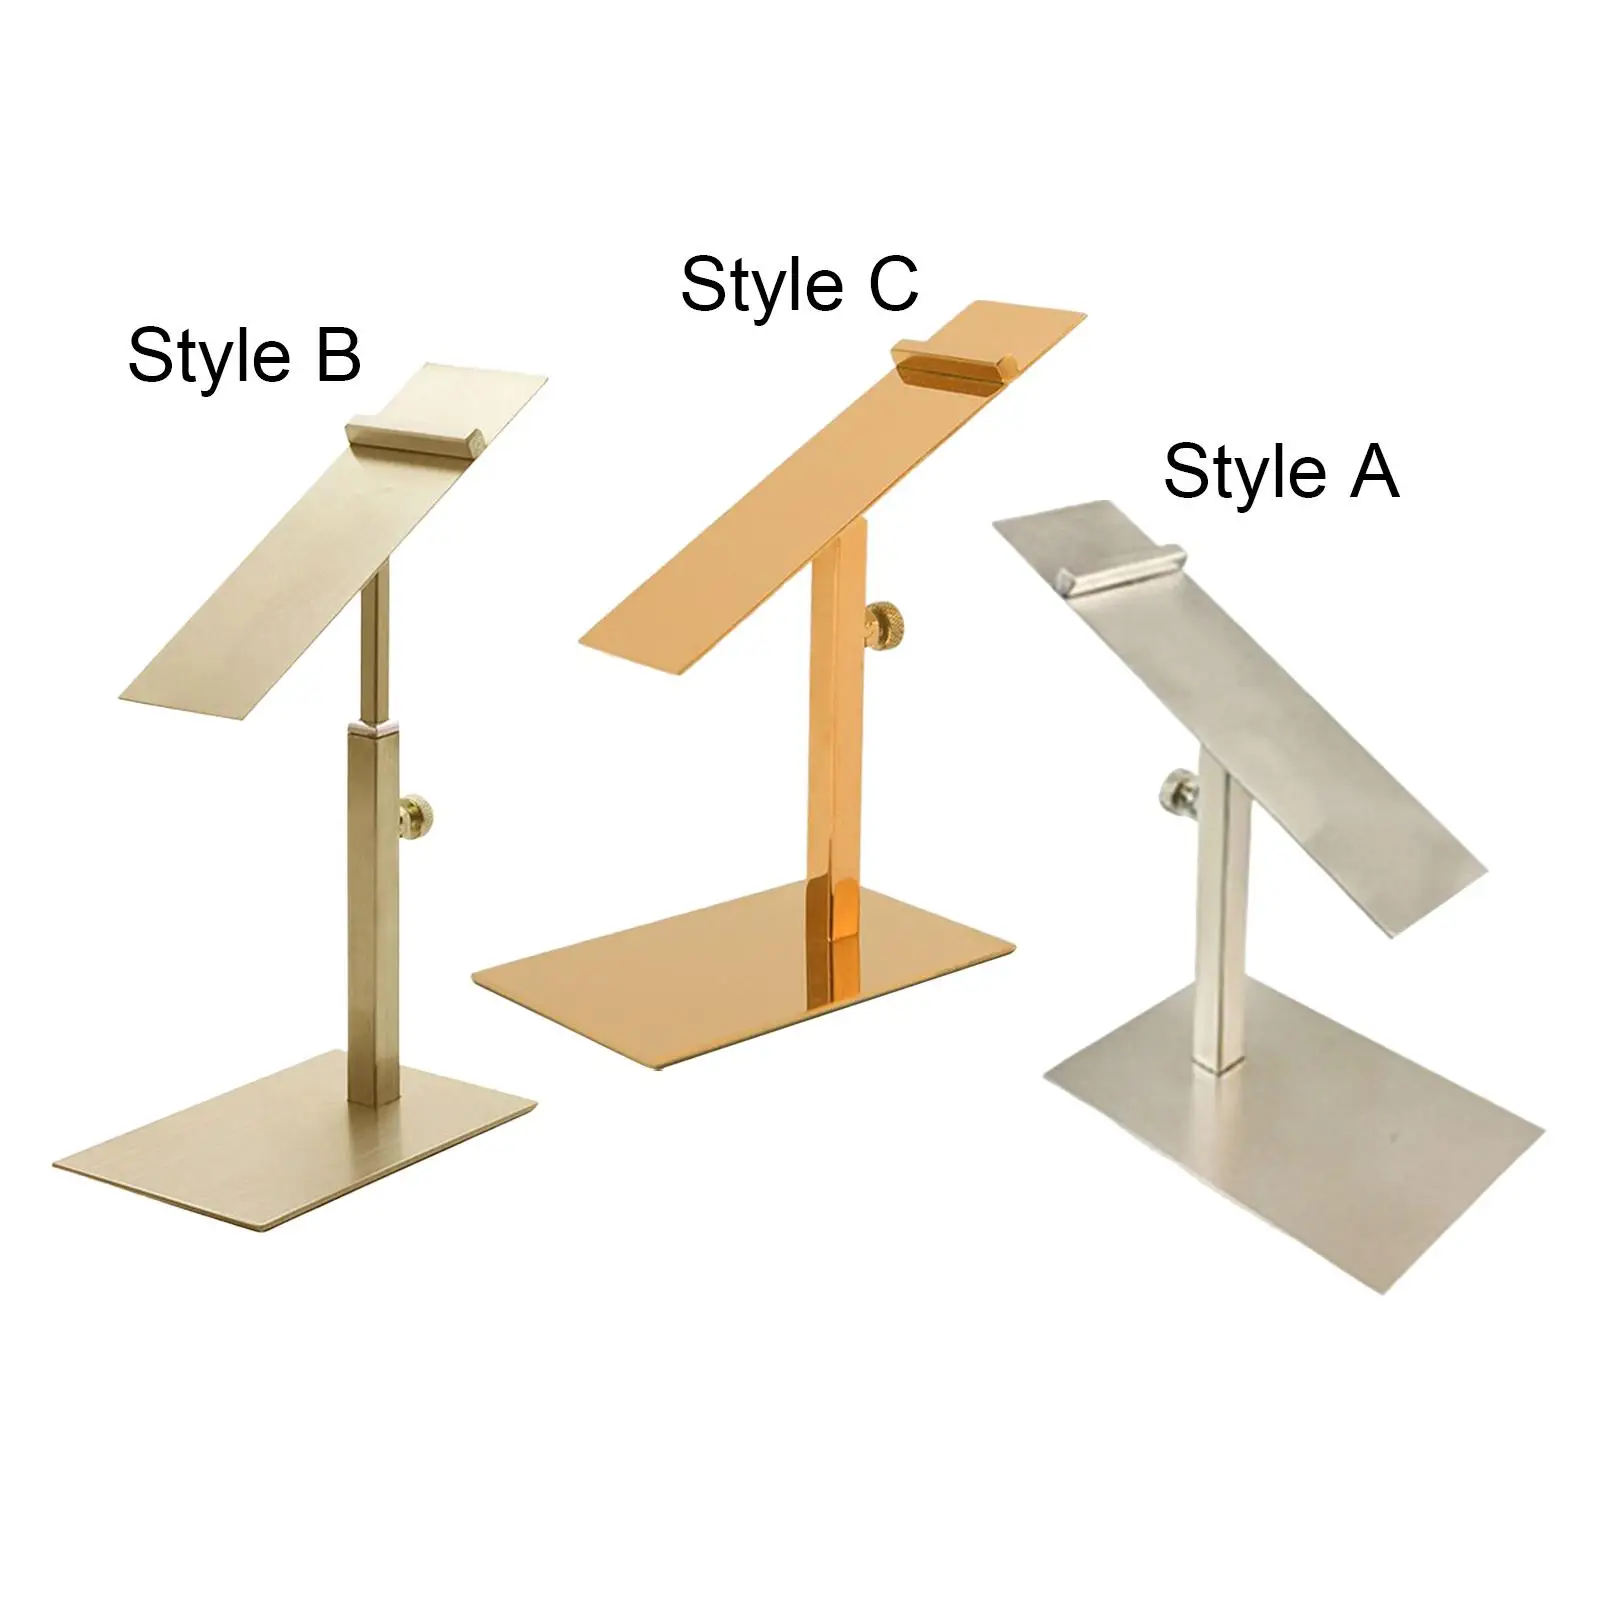 Shoe Display Stand Adjustable Polished Stand Space Saver Holder Shoe Riser for Store Sports Shoes Sandals Men Leather Shoe Women